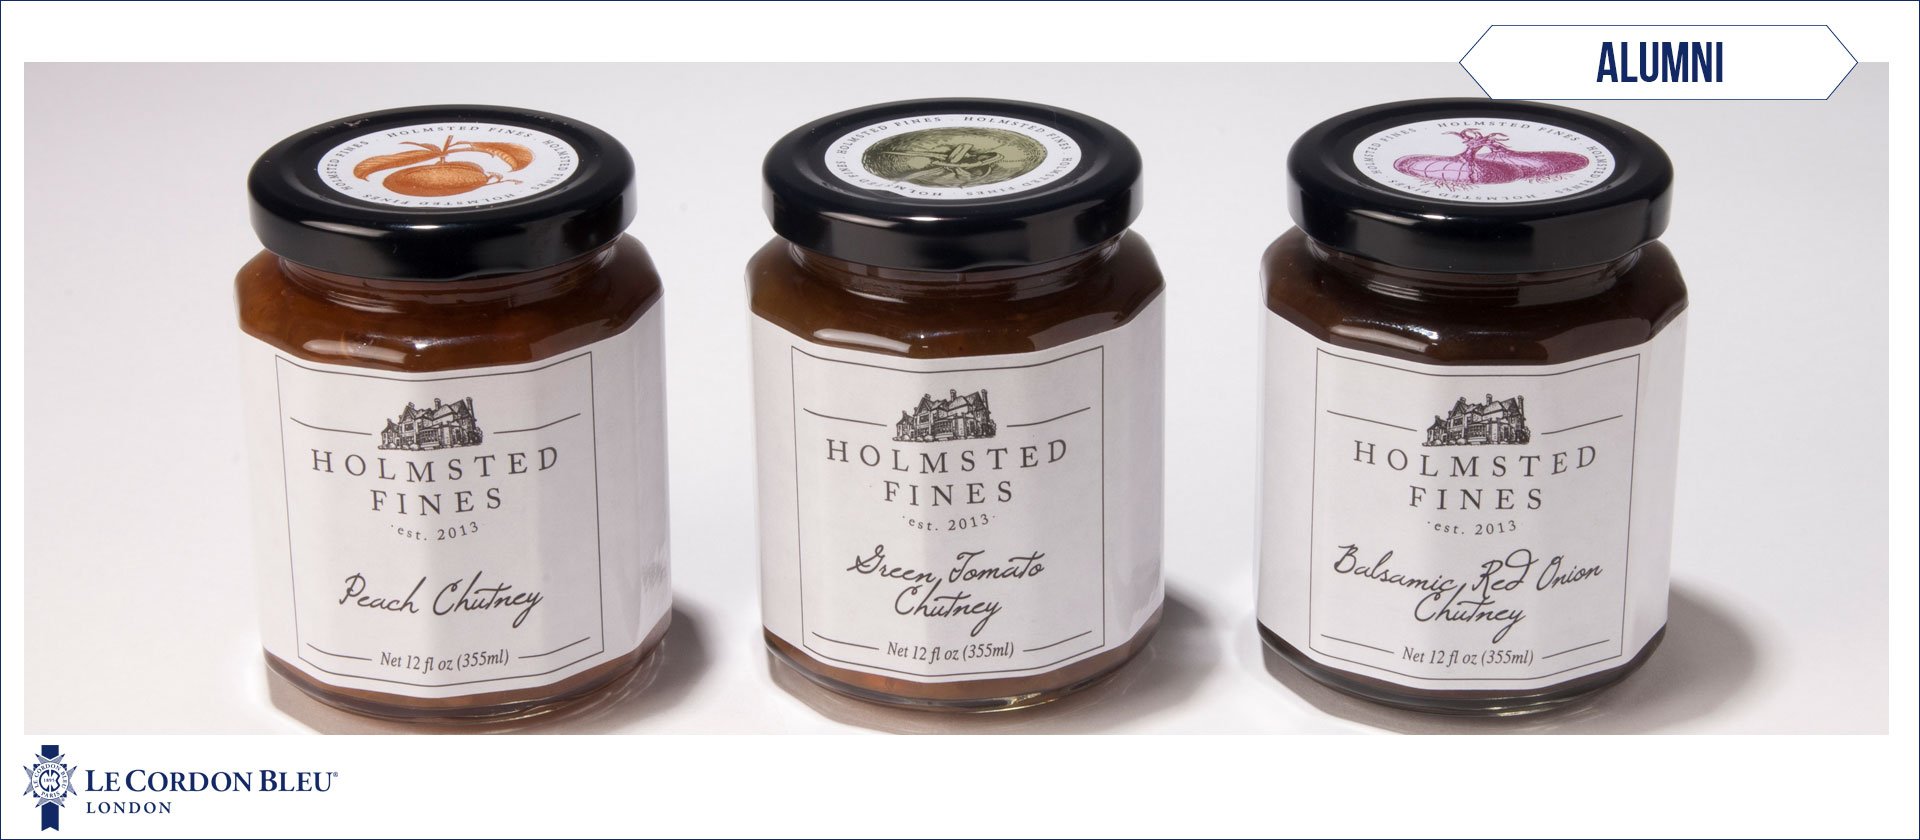 Holmsted Fines Chutney 